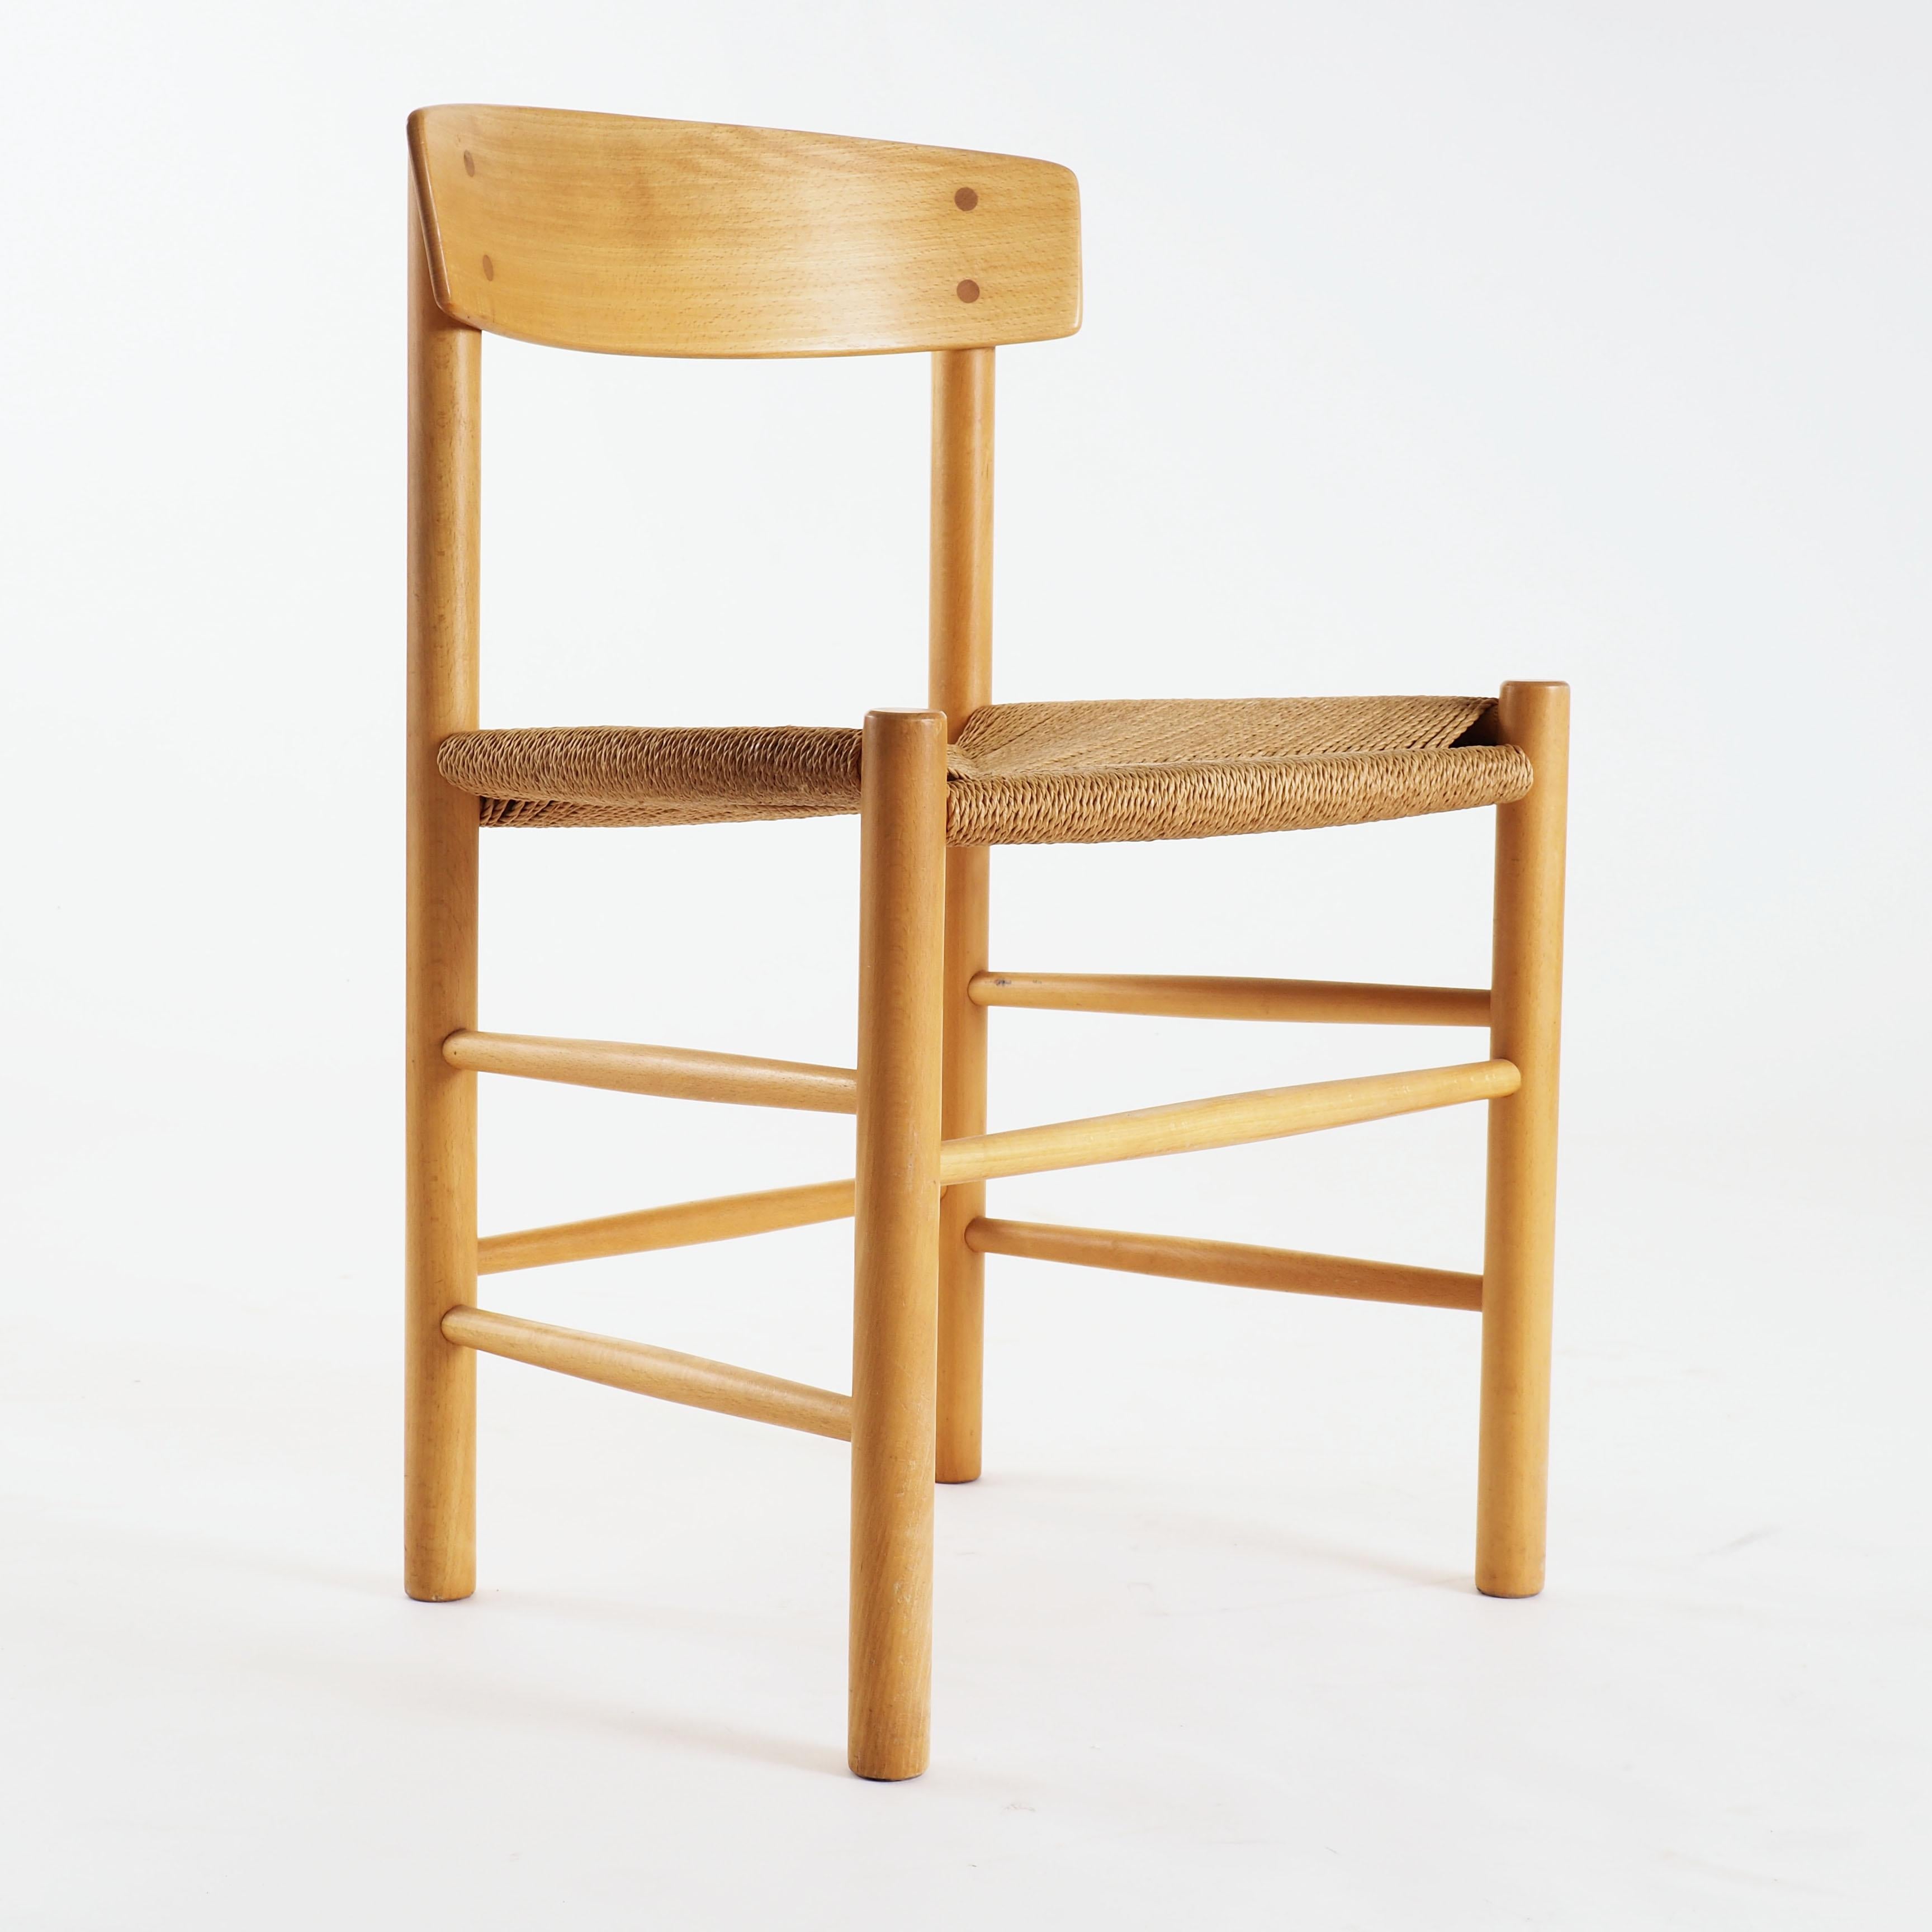 Danish J39 chairs in beech and papercord by Børge Mogensen